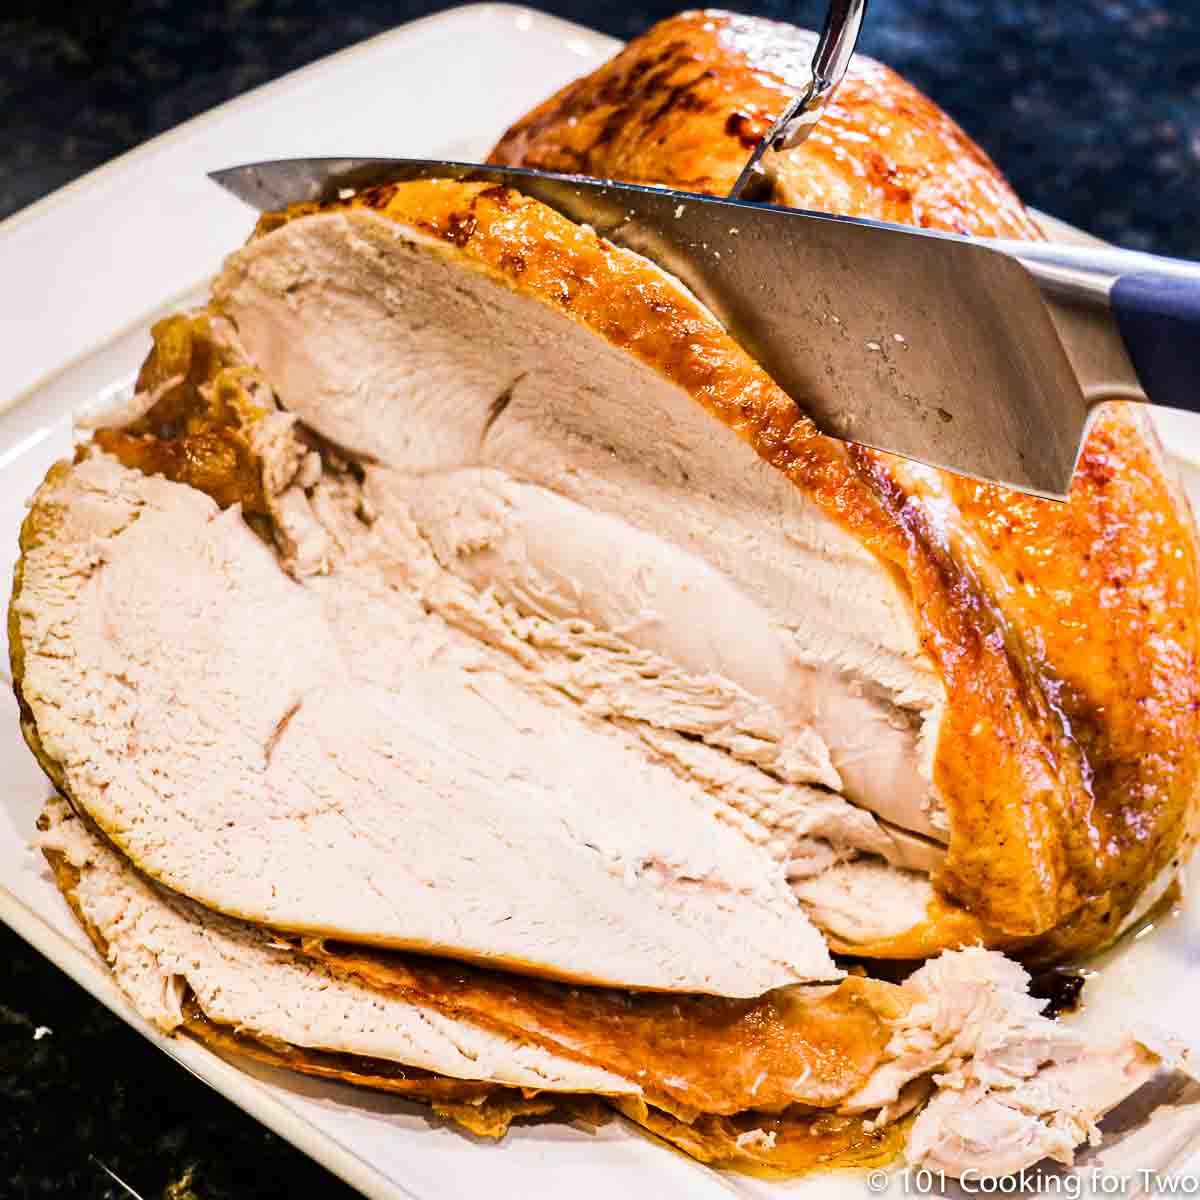 How To Roast Turkey Breast With Gravy 101 Cooking For Two,How To Make Rotel Dip